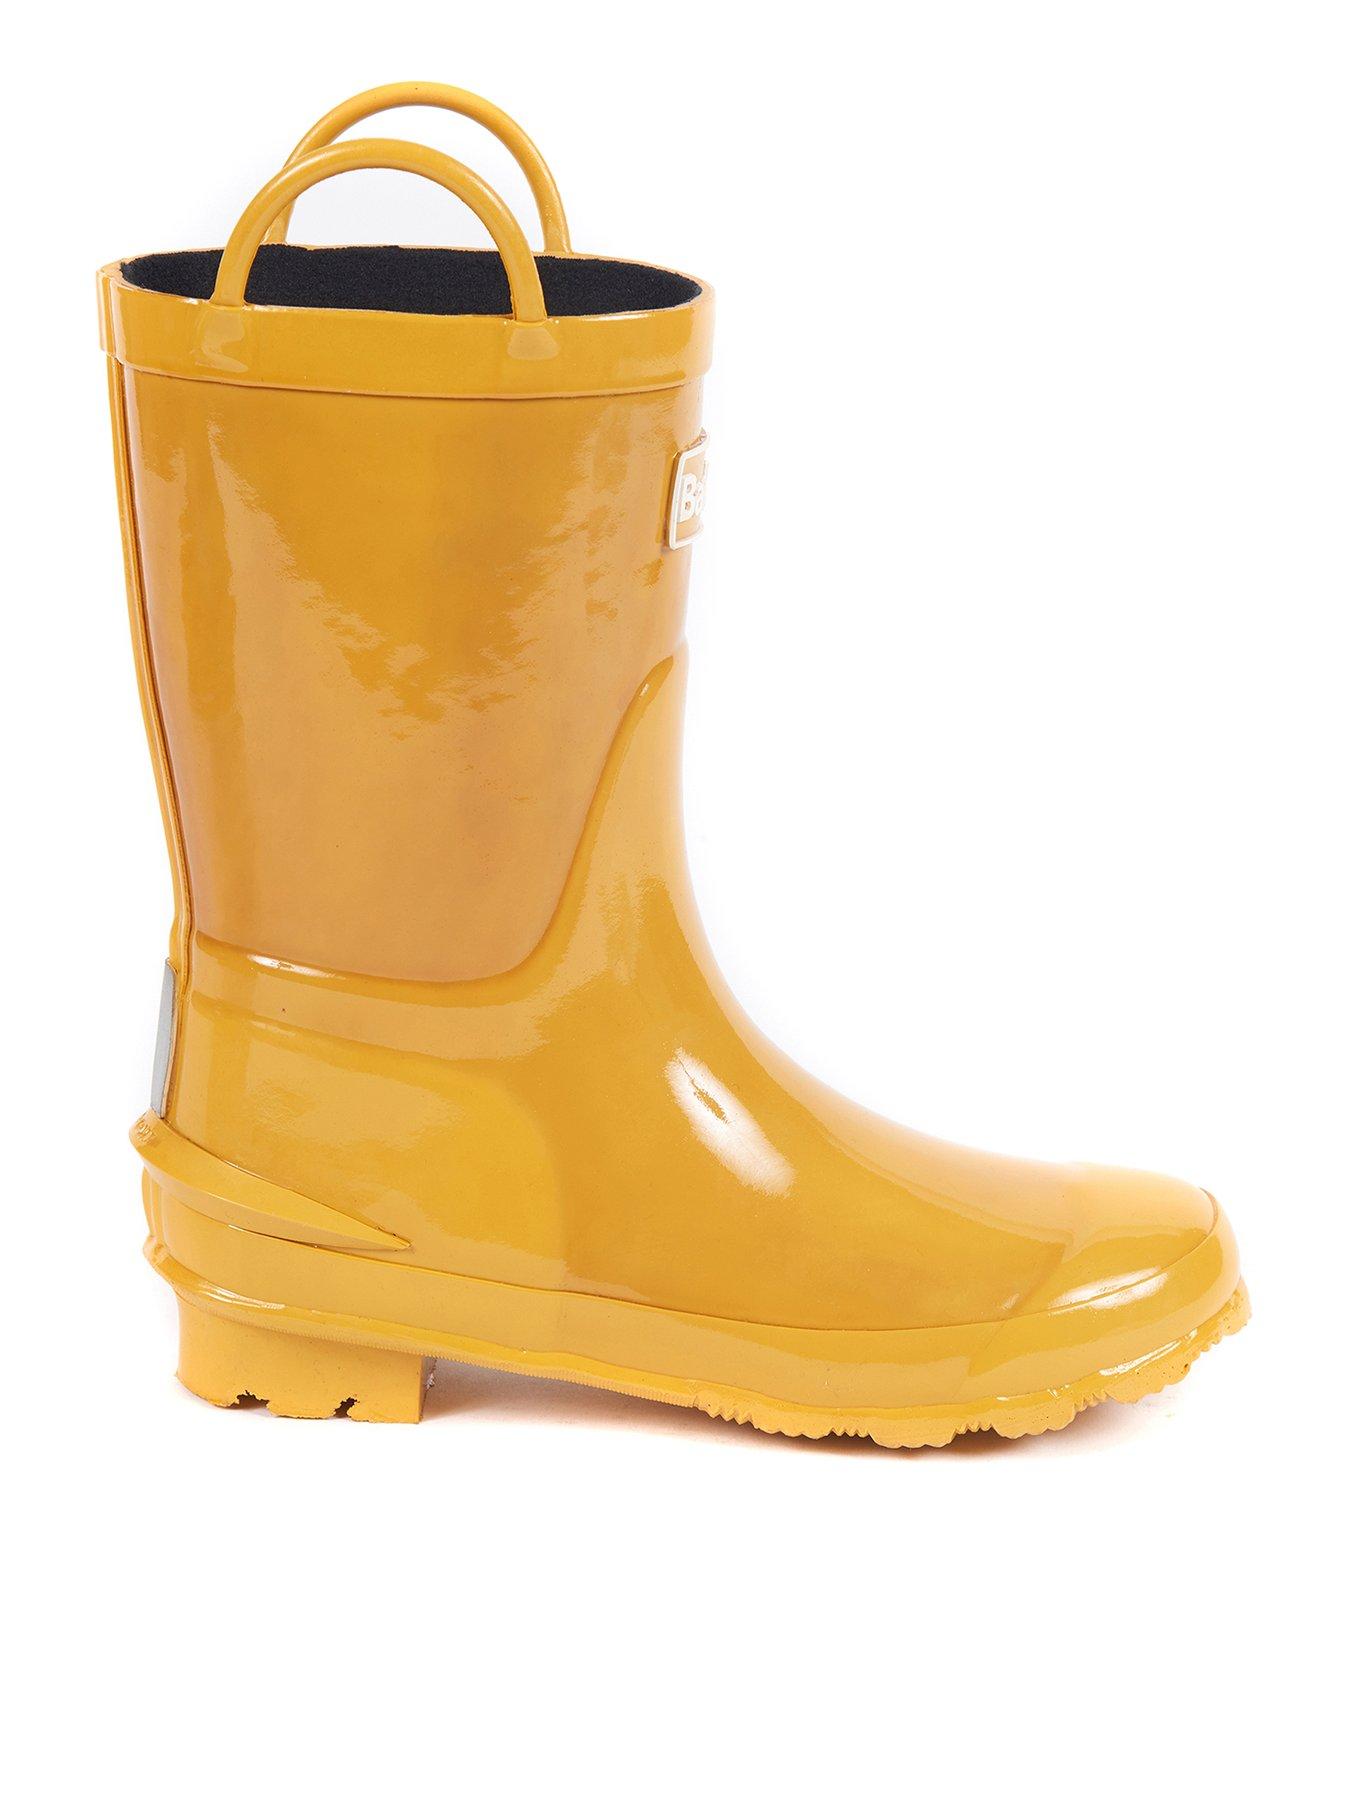 barbour yellow wellies